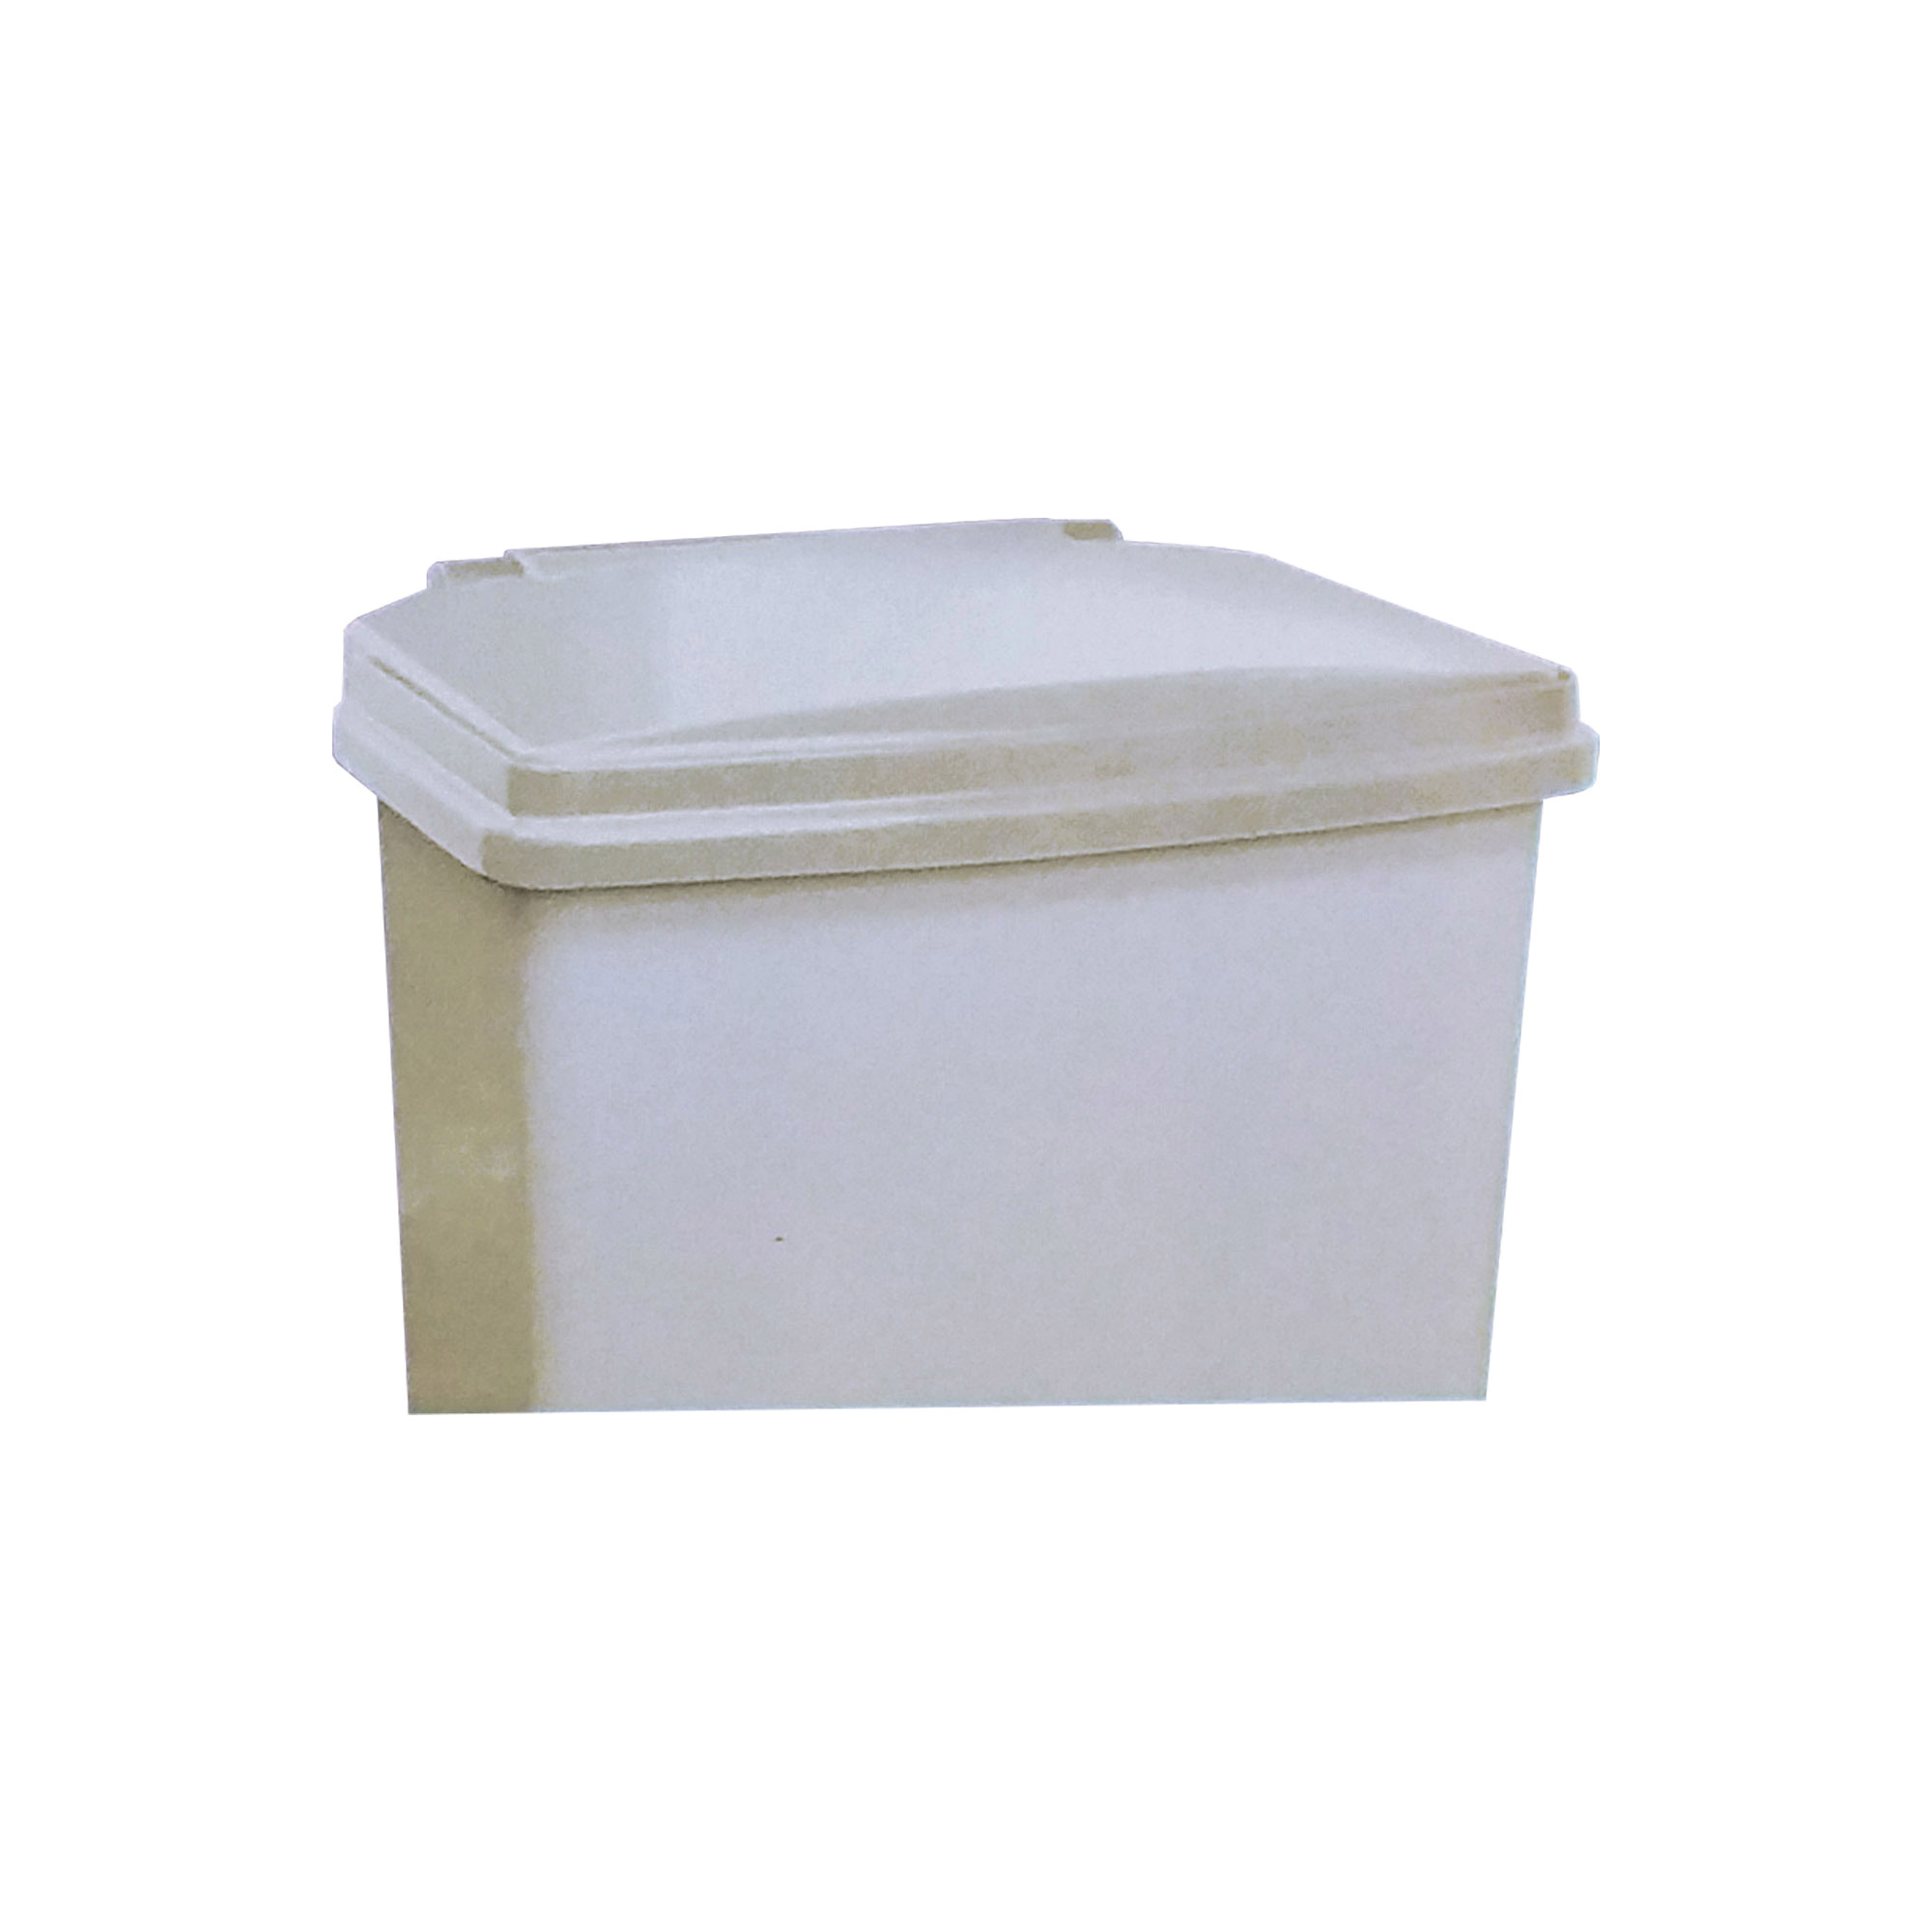 White Replacement Lid For EB-3296 & EB-3297